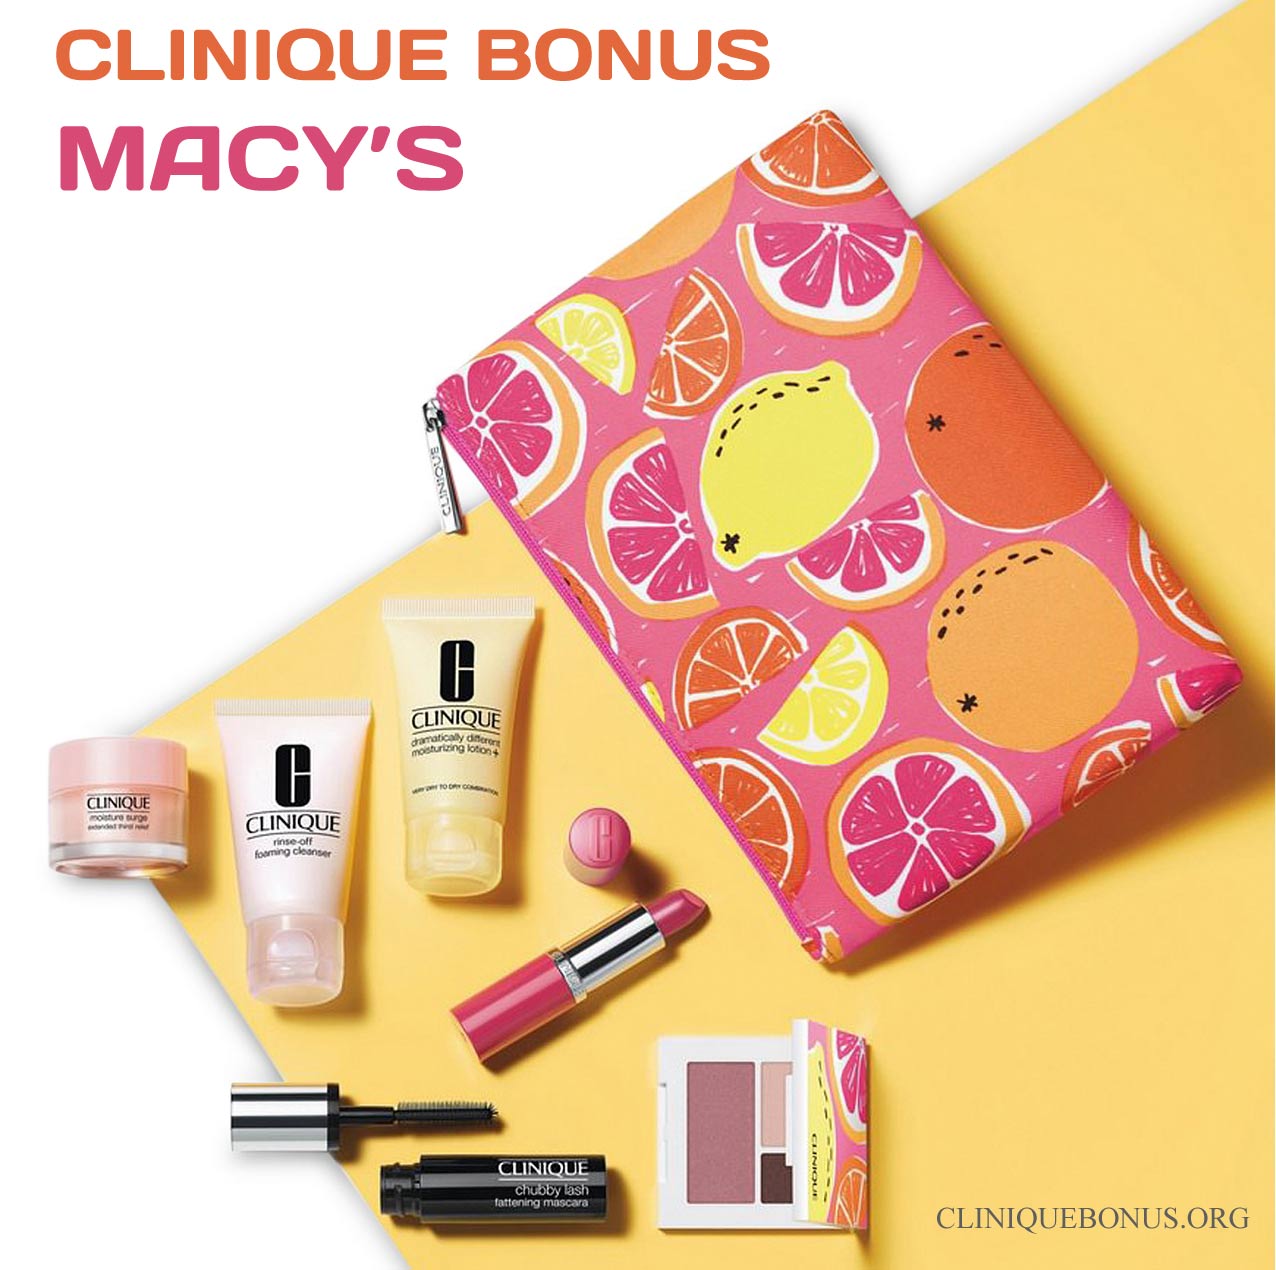 Purchase 28+ to get Clinique Bonus Time gifts March 2018